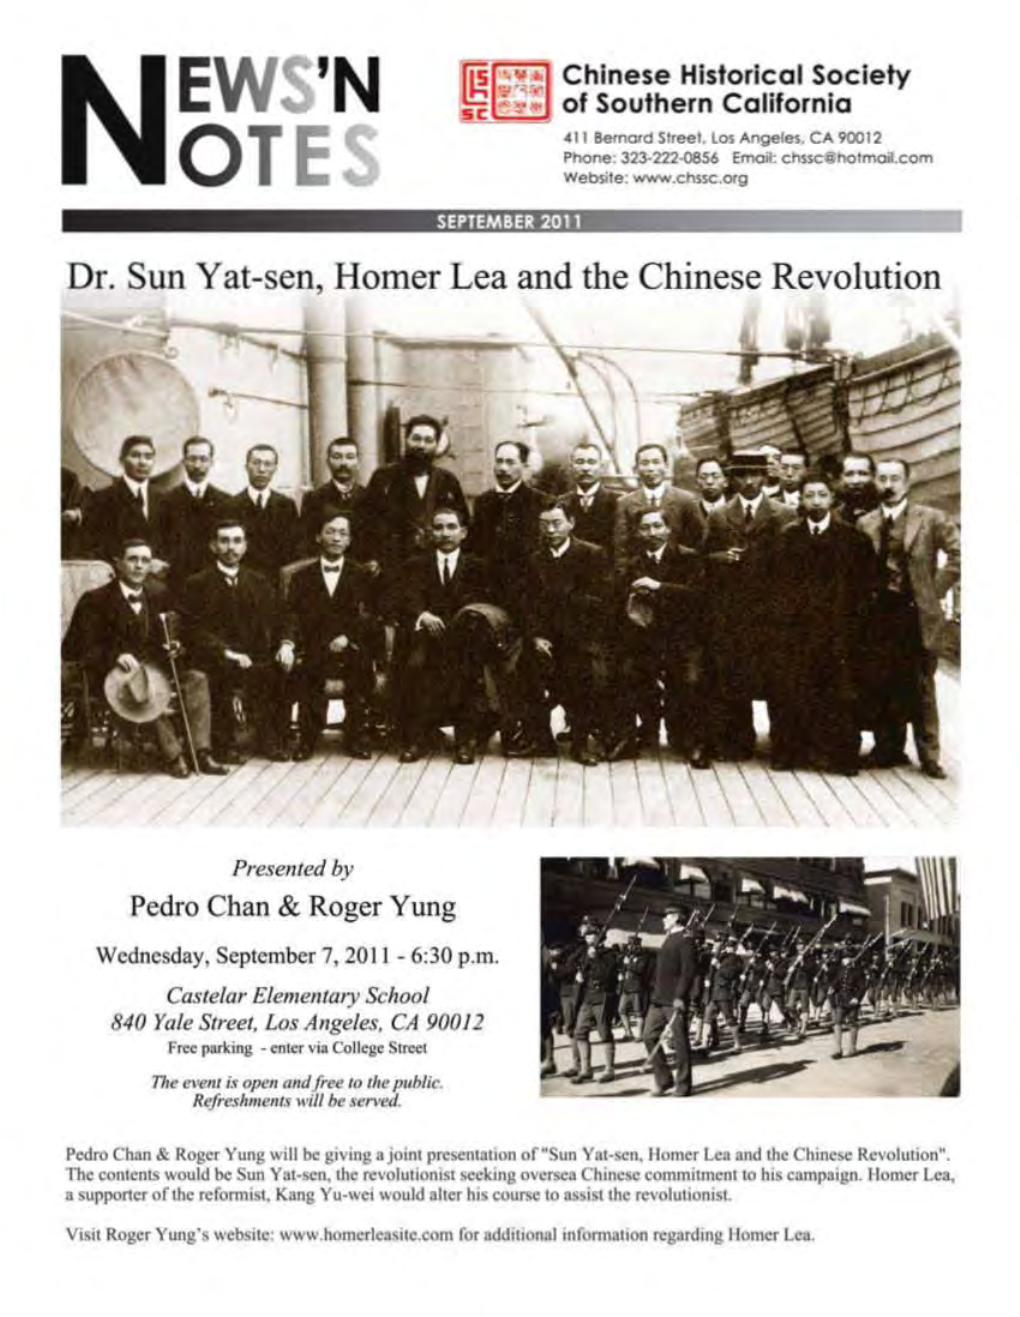 Dr. Sun Yat-Sen, Homer Lea and the Chinese Revolution